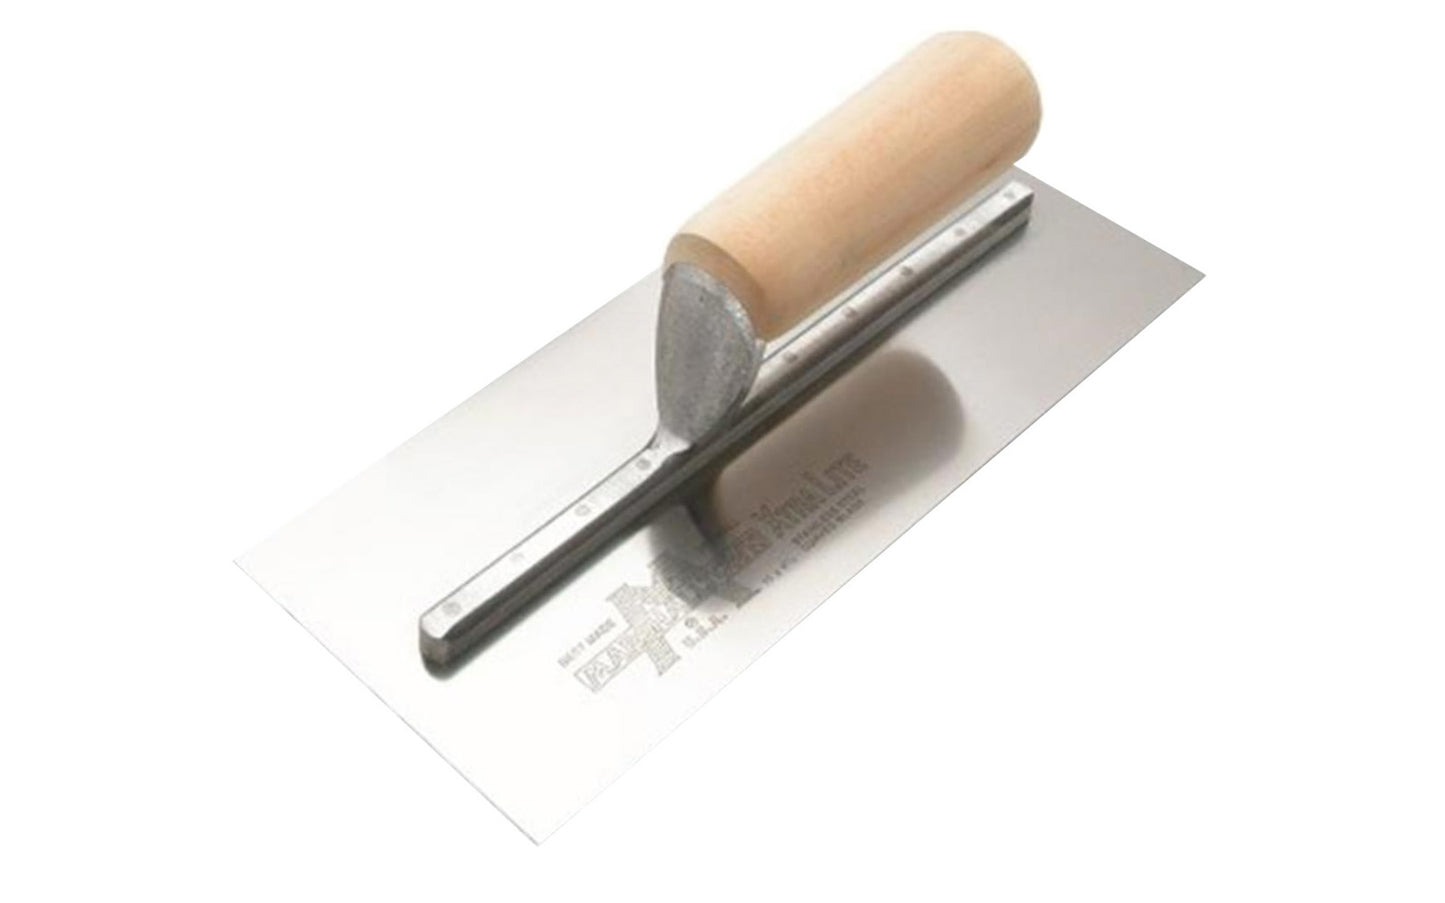 Marshalltown 11" x 4-1/2" Drywall Trowel with a slight concave bow that allows you to easily feather mud for perfectly smooth drywall joints and repair jobs. The flexible blade is tempered, ground, and polished for enhanced performance. Model 12. Made in USA